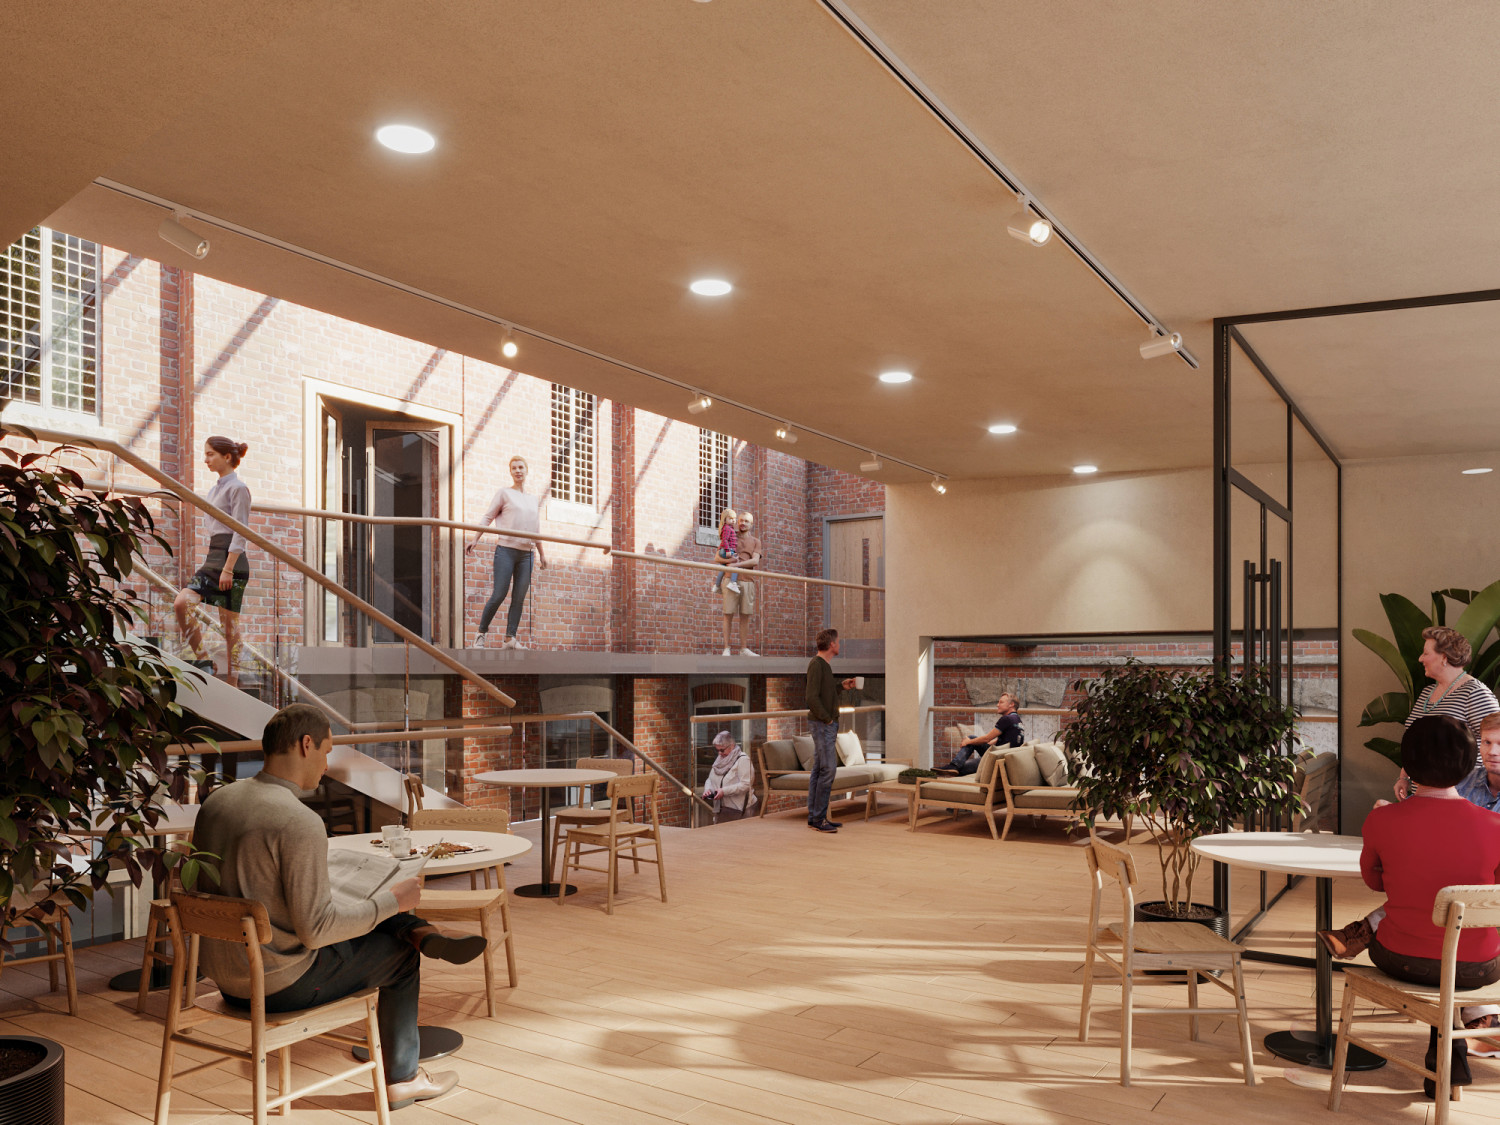 Artist's impression of the interior of The Link building